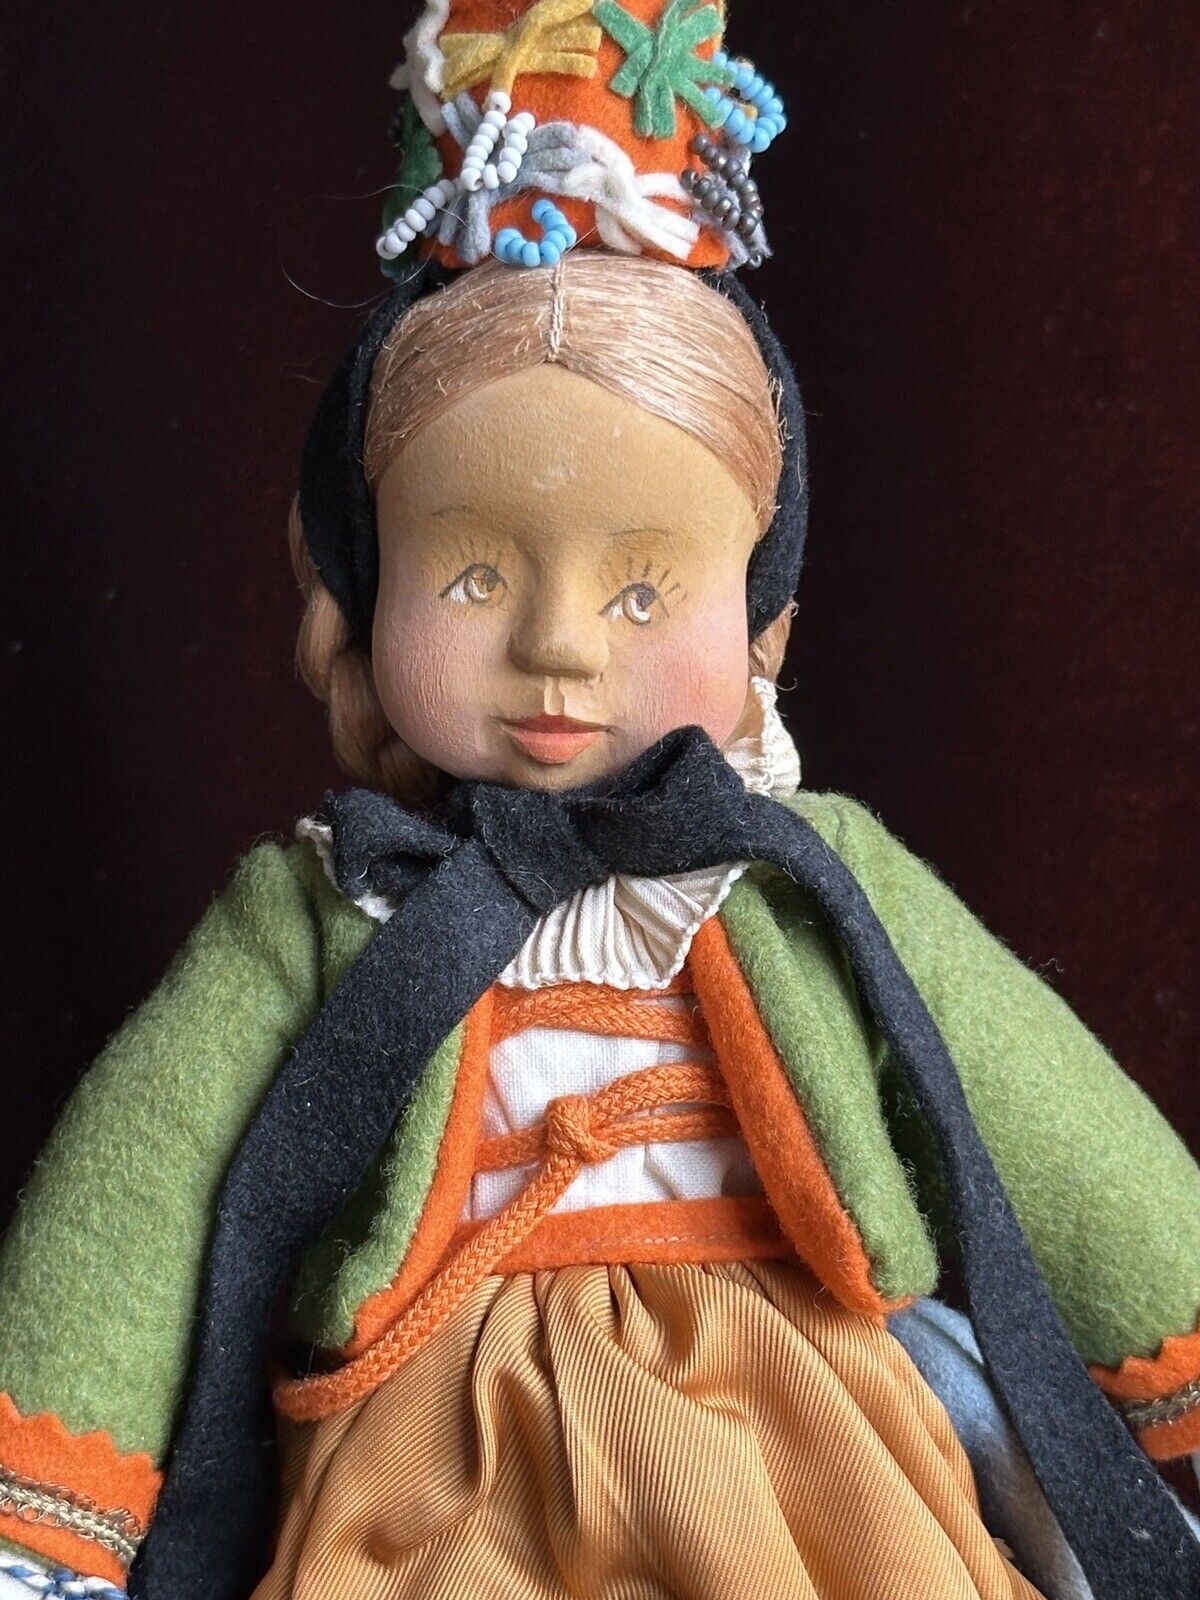 Antique German 9” Anna Fehrle Carved Wooden/Cloth Girl Doll with Tag